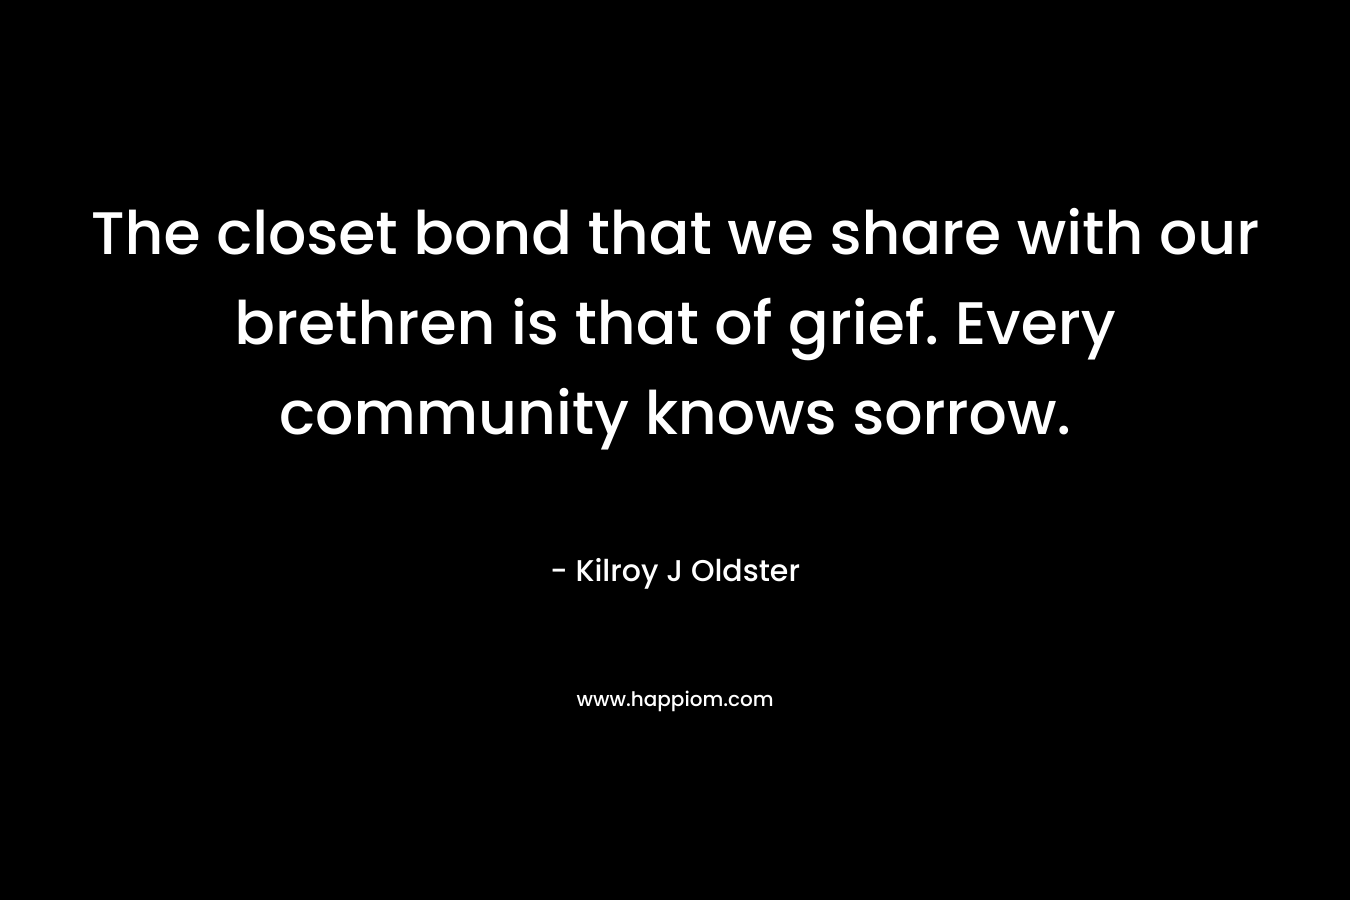 The closet bond that we share with our brethren is that of grief. Every community knows sorrow.